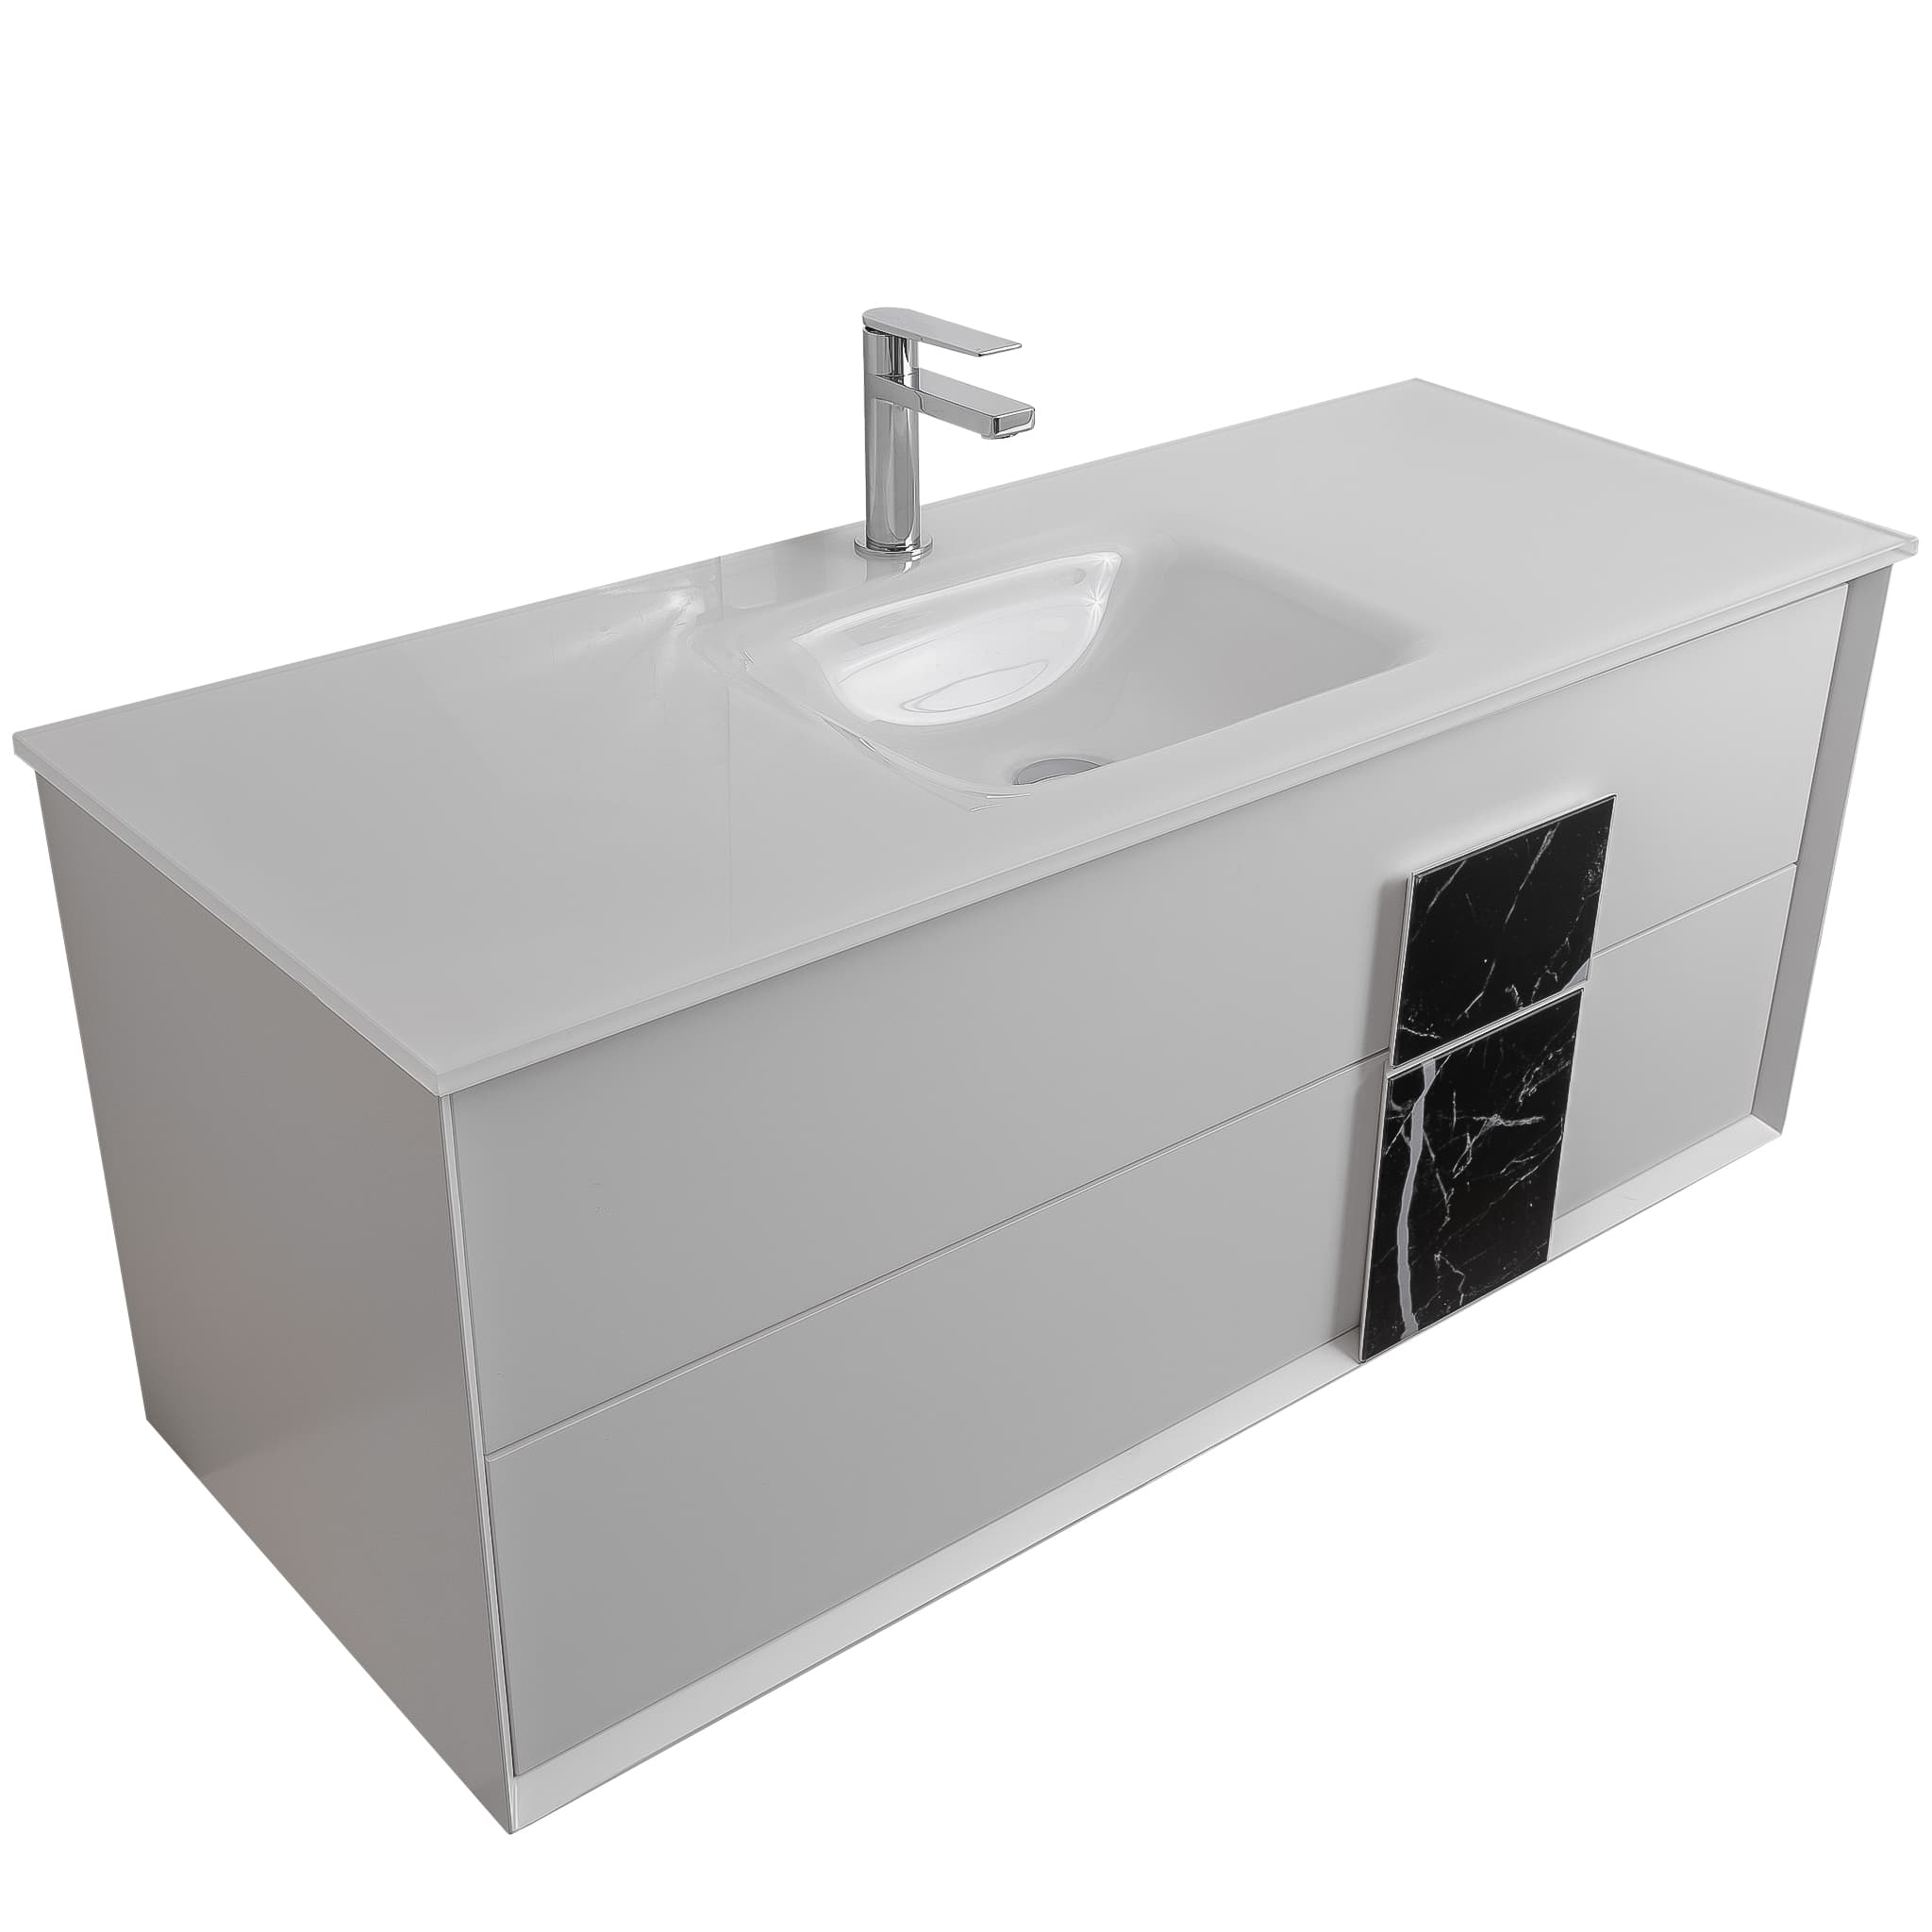 Piazza 47.5 Matte White With Black Marble Handle Cabinet, White Tempered Glass Sink, Wall Mounted Modern Vanity Set